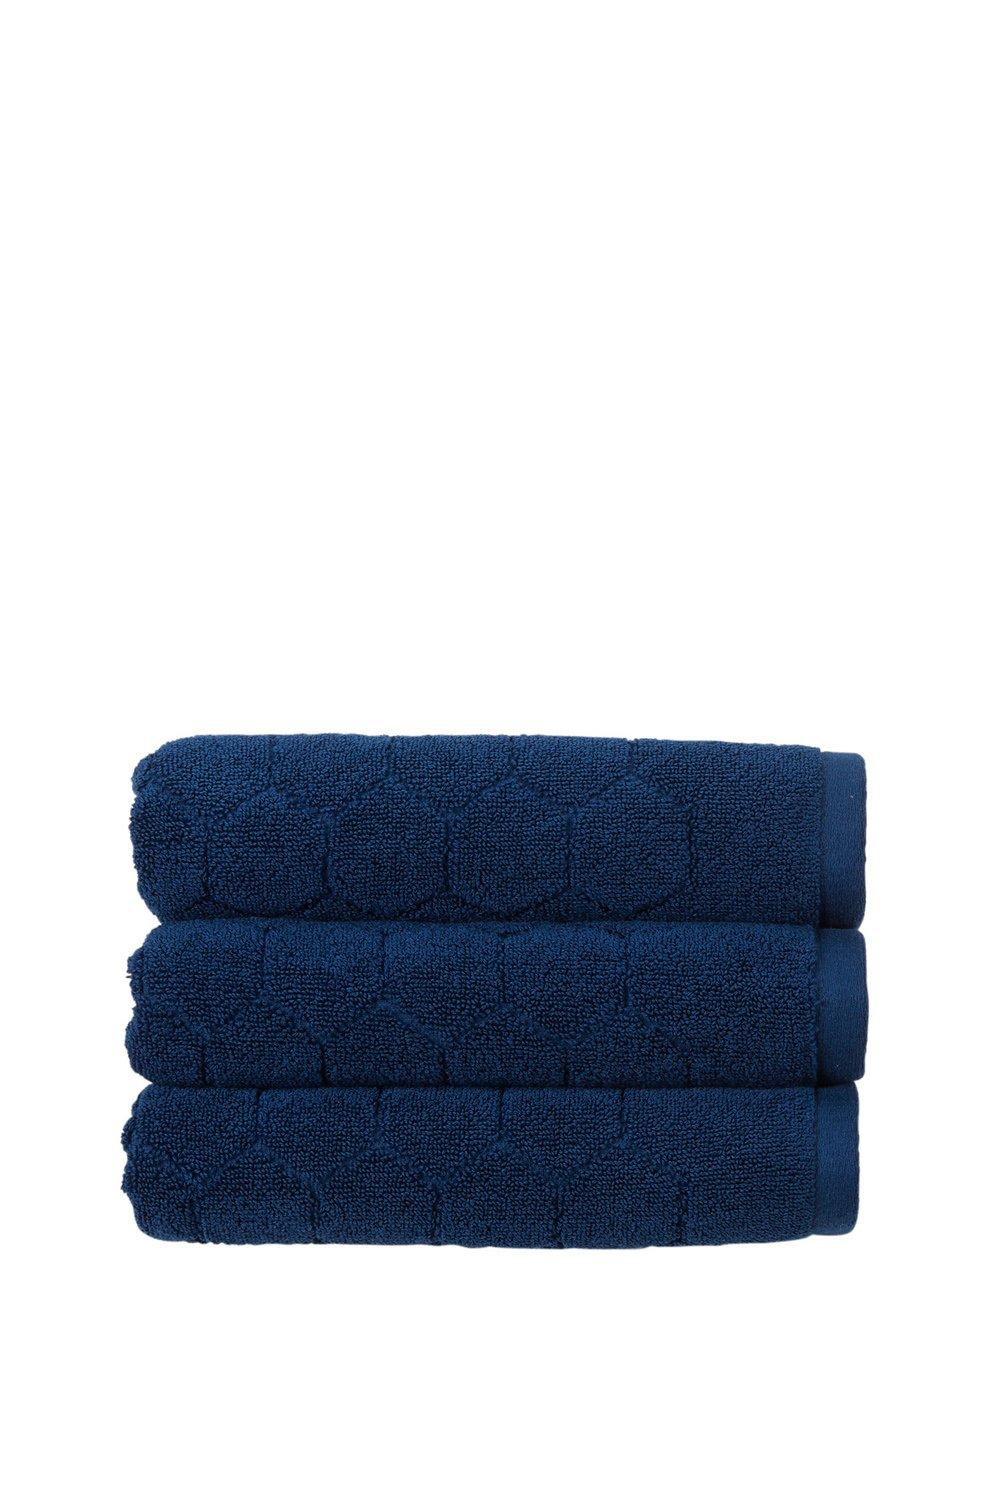 Picture of Honeycomb Bath Towel